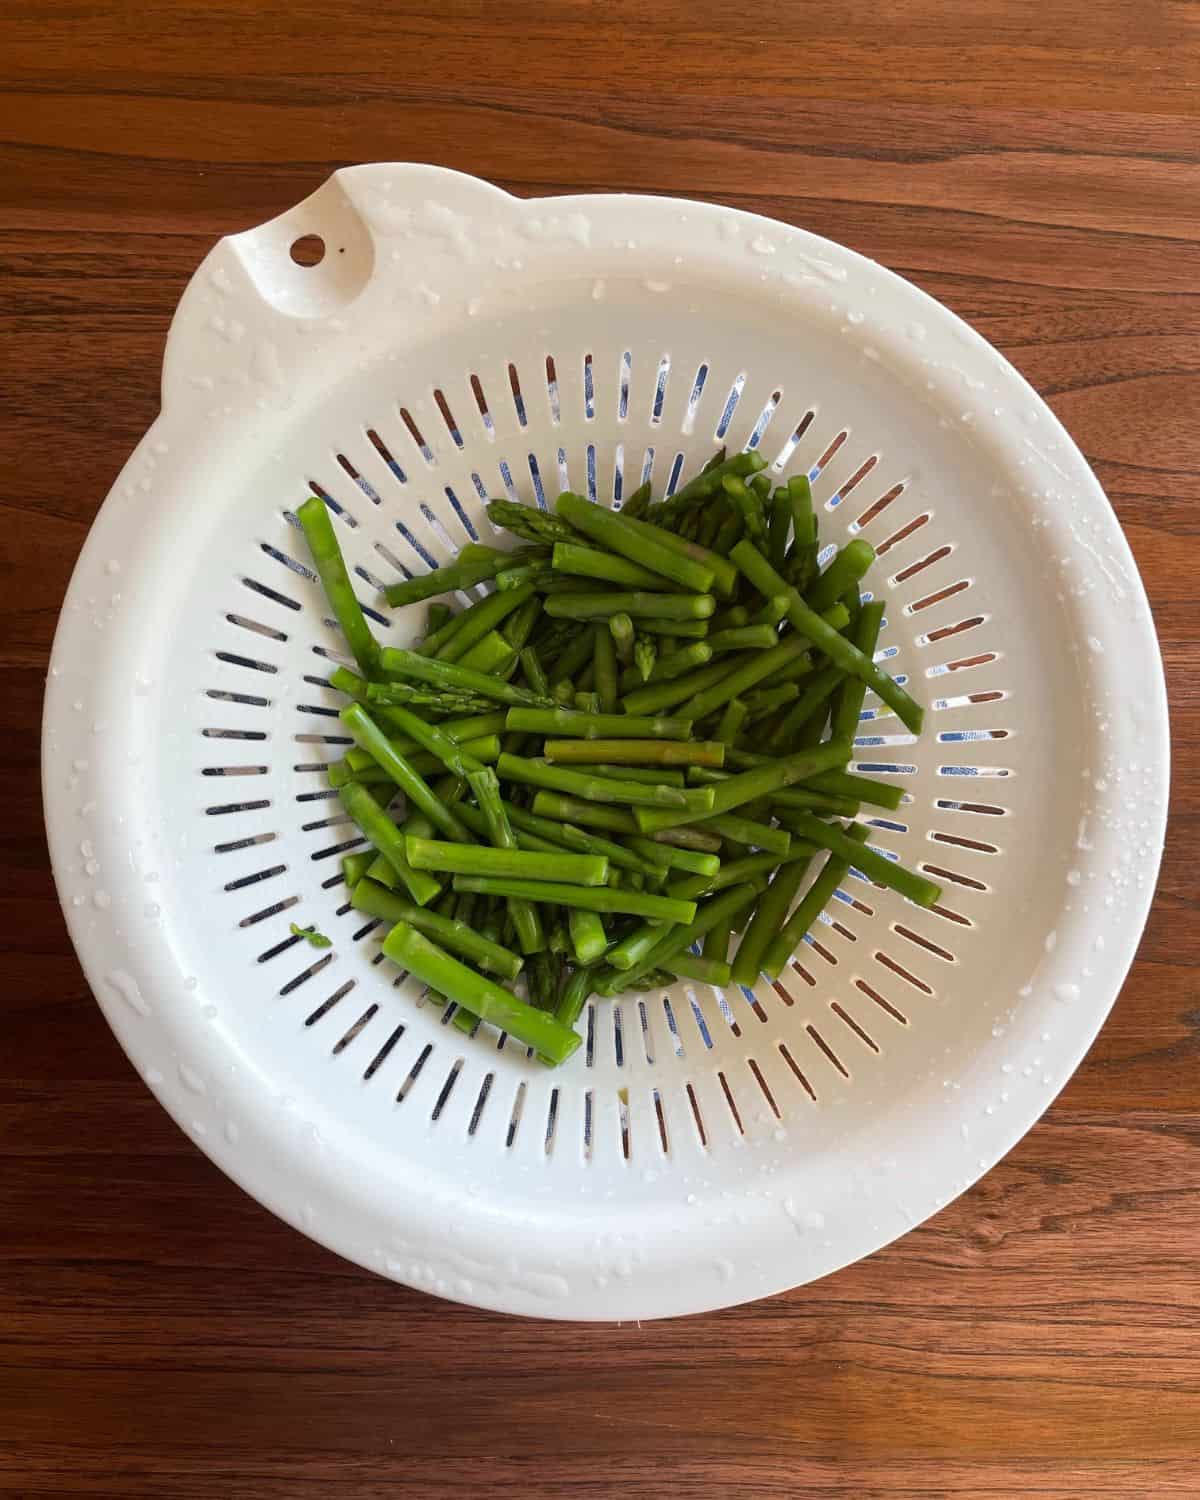 Cooked asparagus pieces in a white plastic strainer.